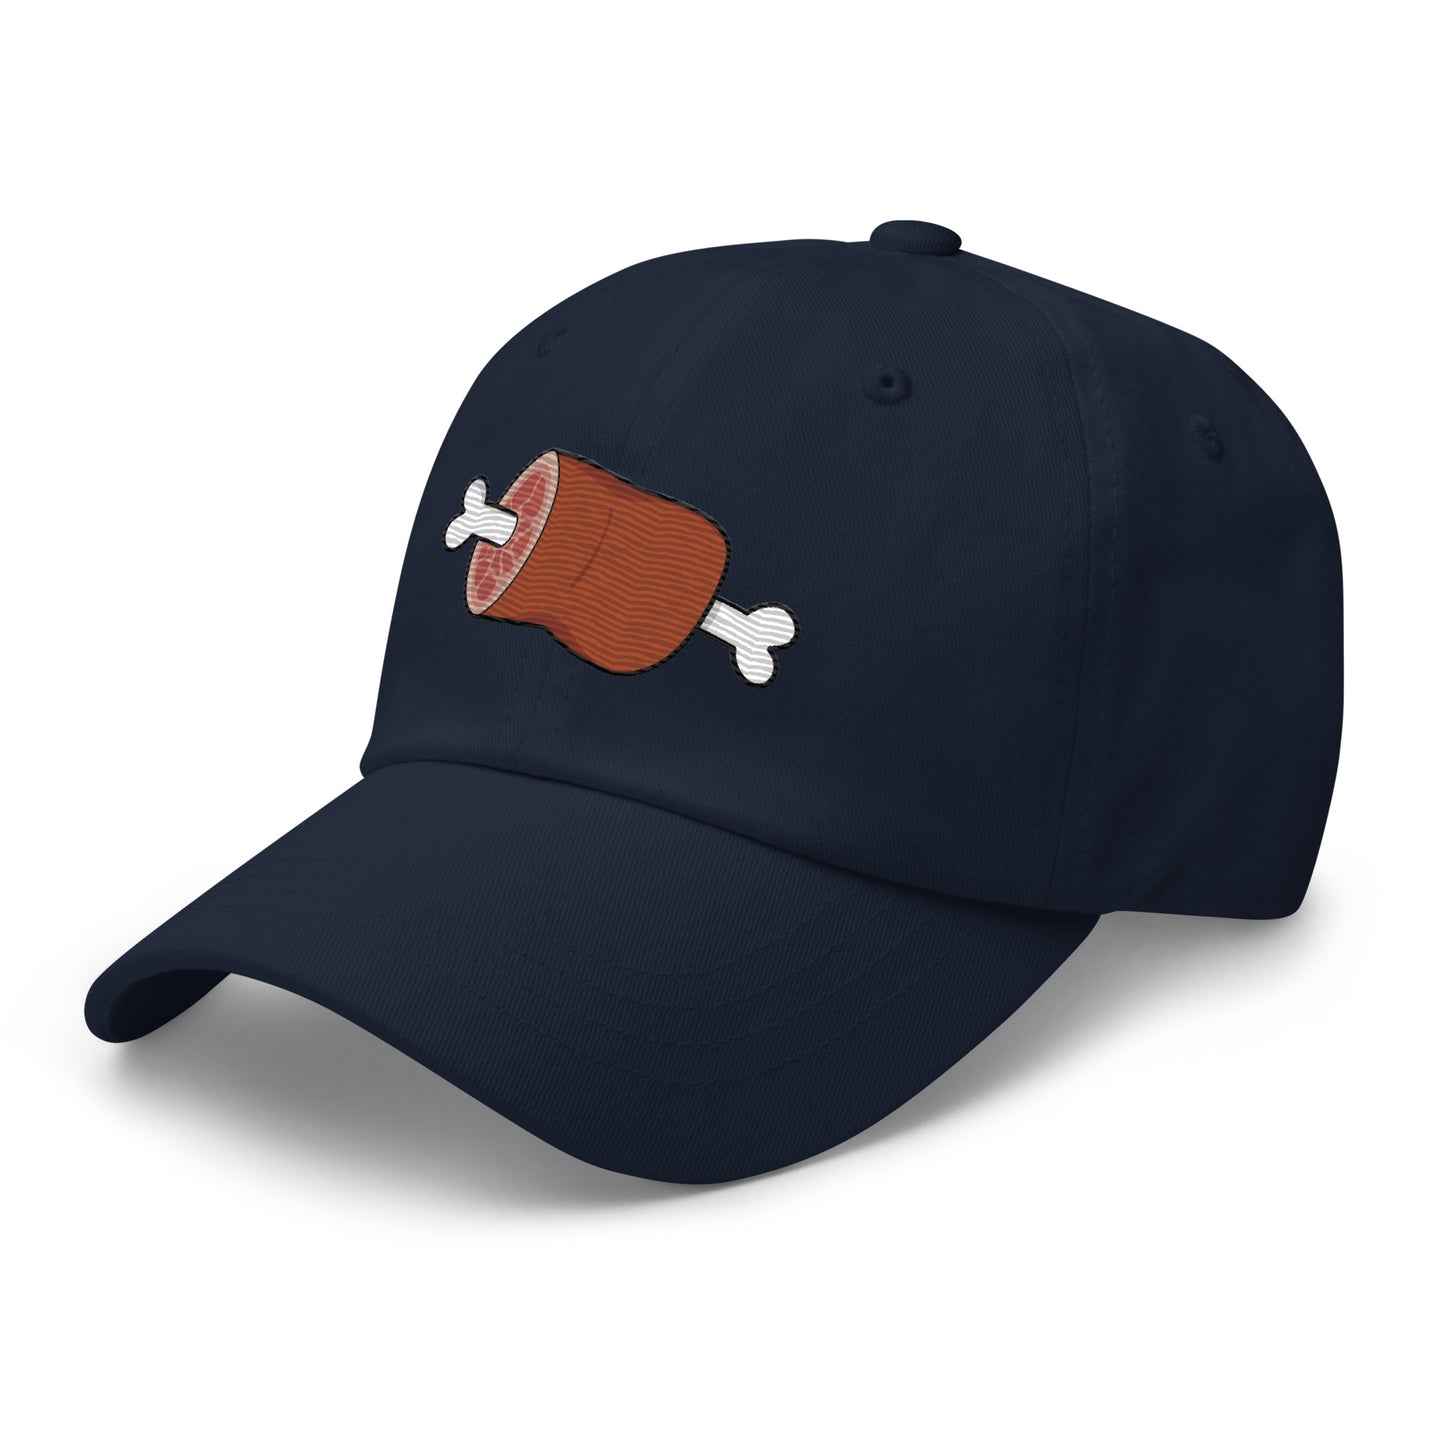 Anime Meat Dad hat